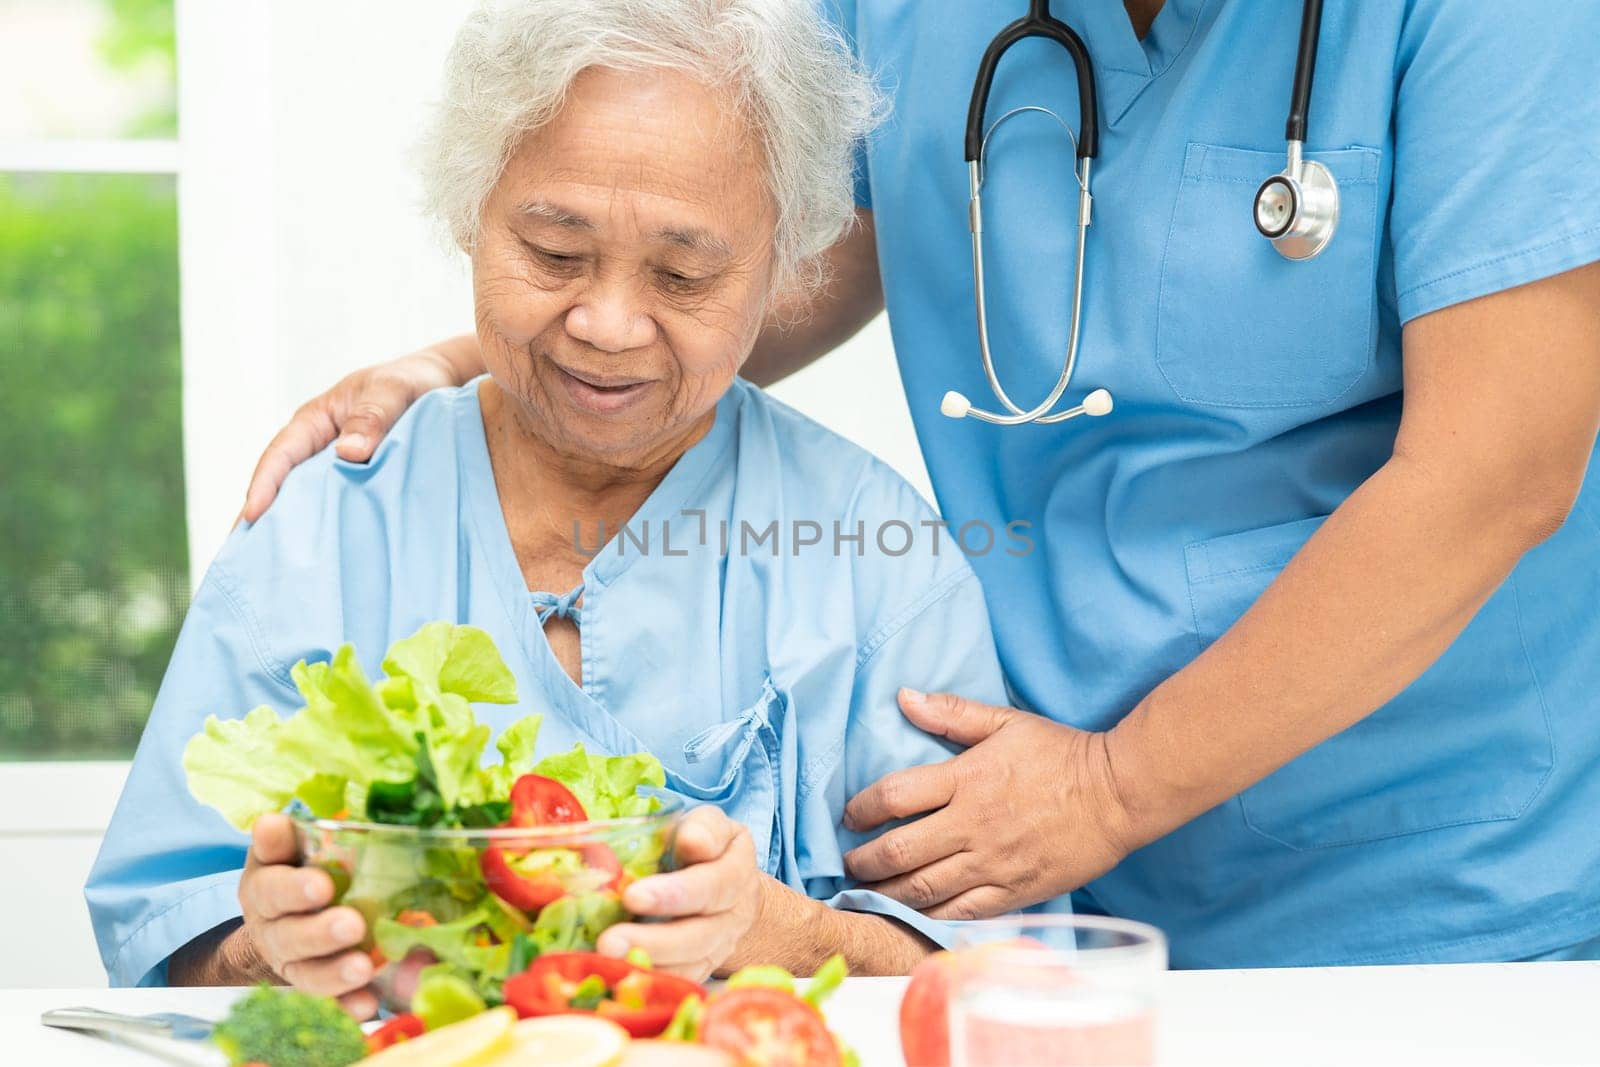 Asian elderly woman patient eating salmon steak breakfast with vegetable healthy food in hospital. by pamai